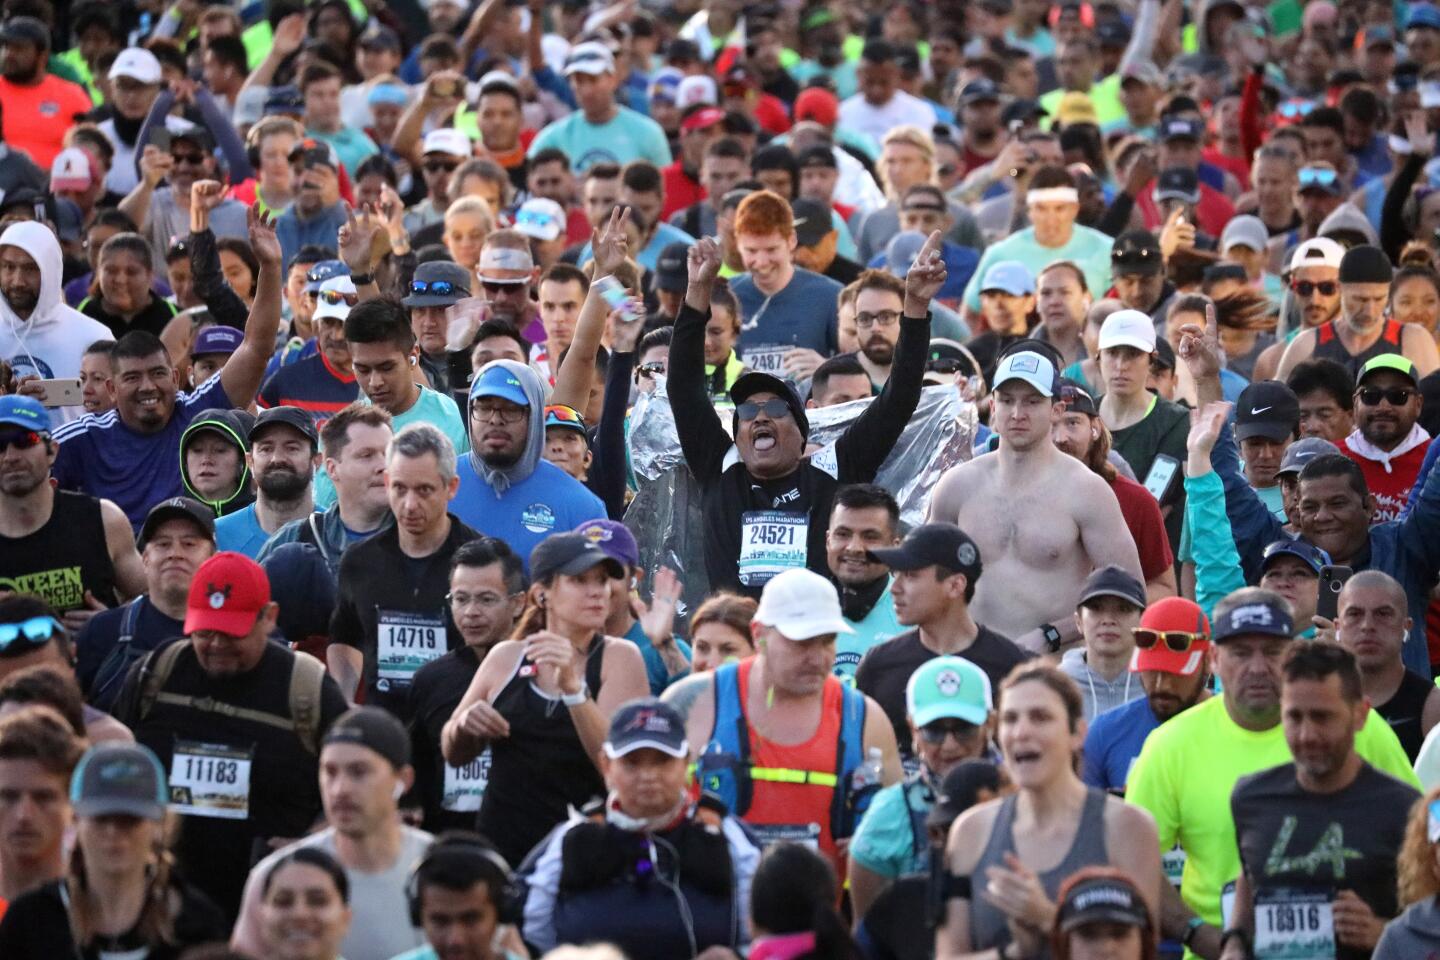 Dodger Stadium was packed with an enthusiastic crowd at the start of the 35th L.A. Marathon.